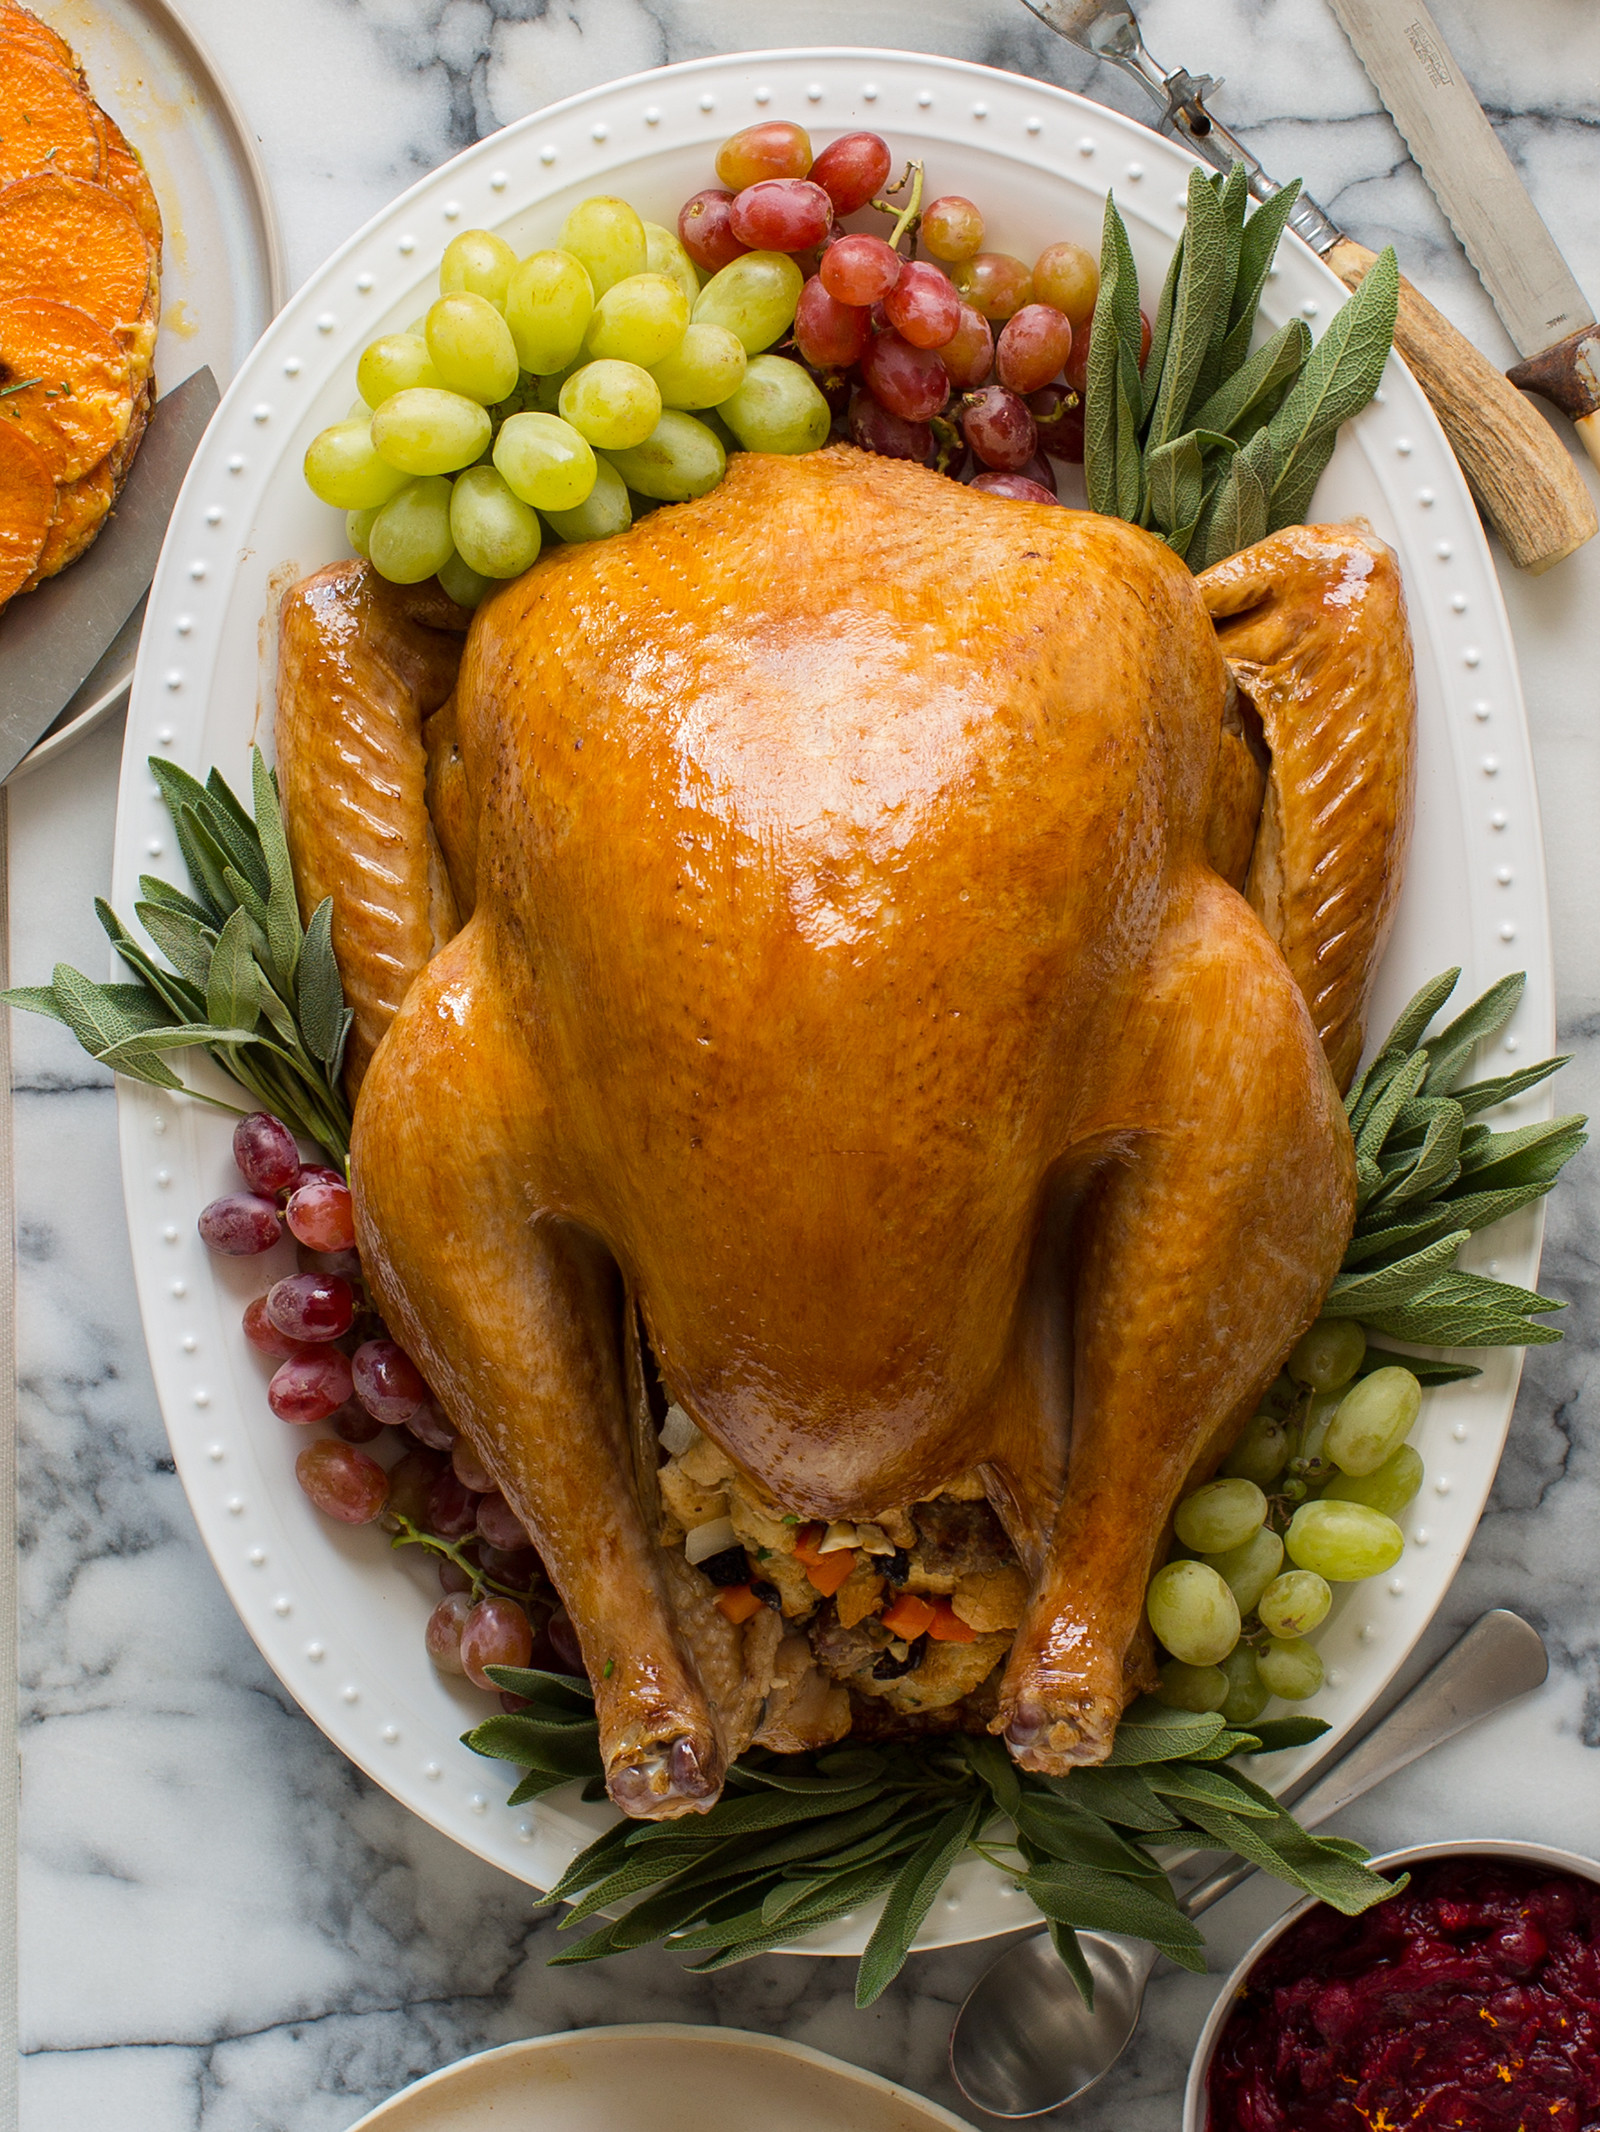 Turkey Ideas For Thanksgiving
 Citrus and Herb Roasted Turkey Thanksgiving